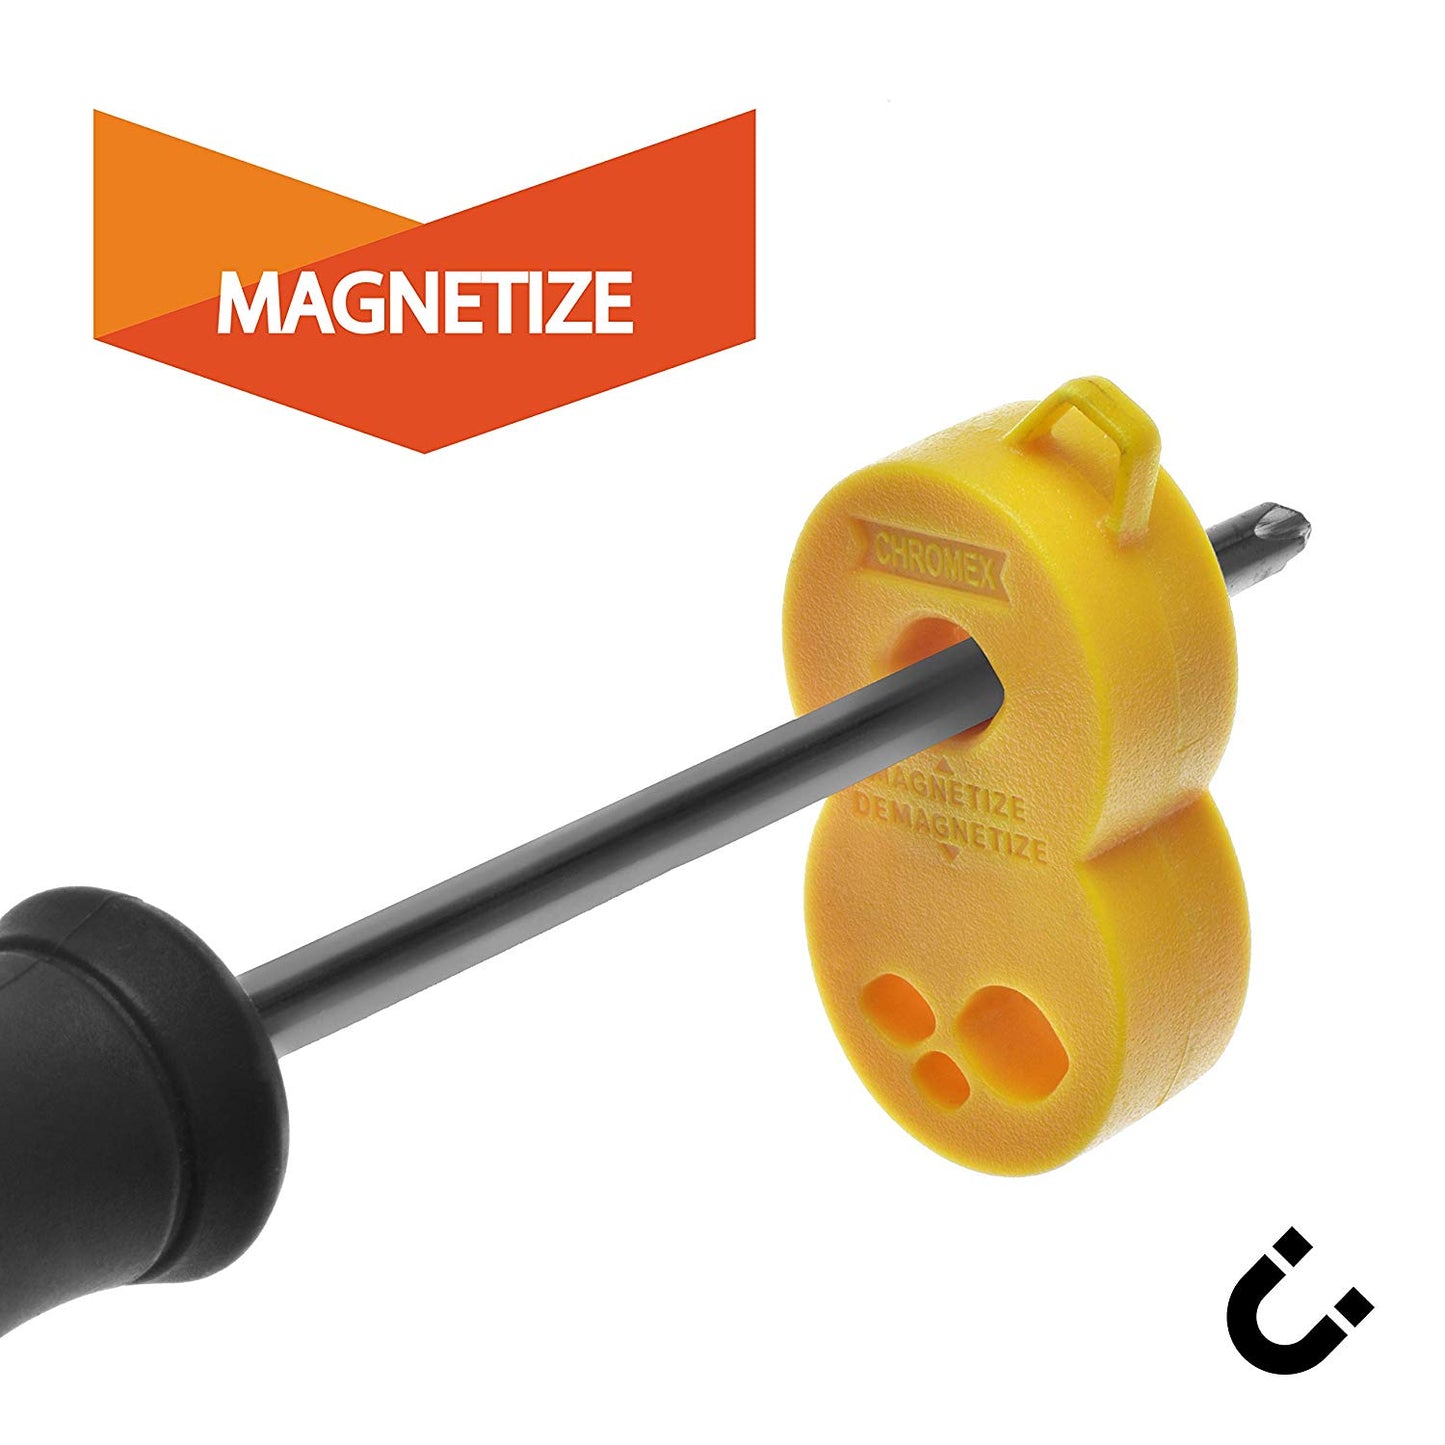 Magnetizer Demagnetizer Tool for Screwdrivers and Bits